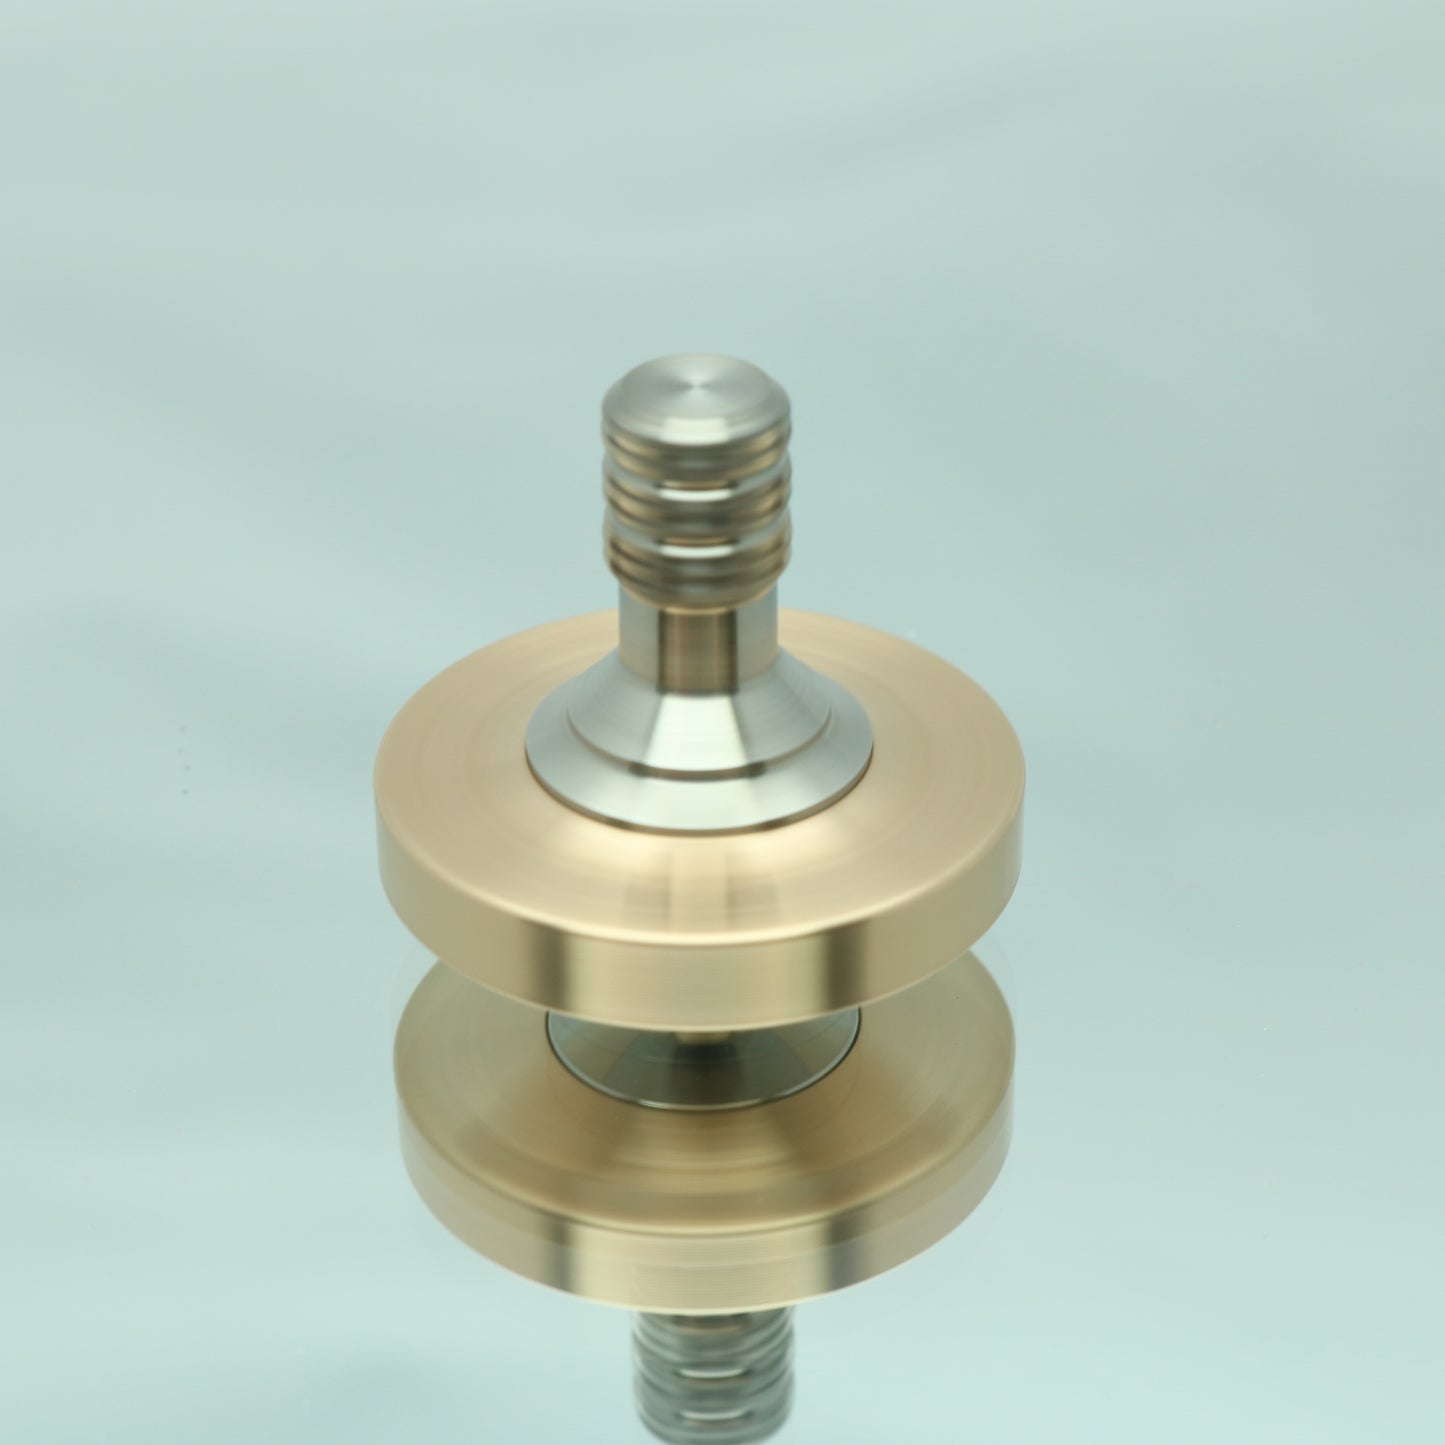 Two Step - Brushed Phosphor Bronze and Stainless Steel